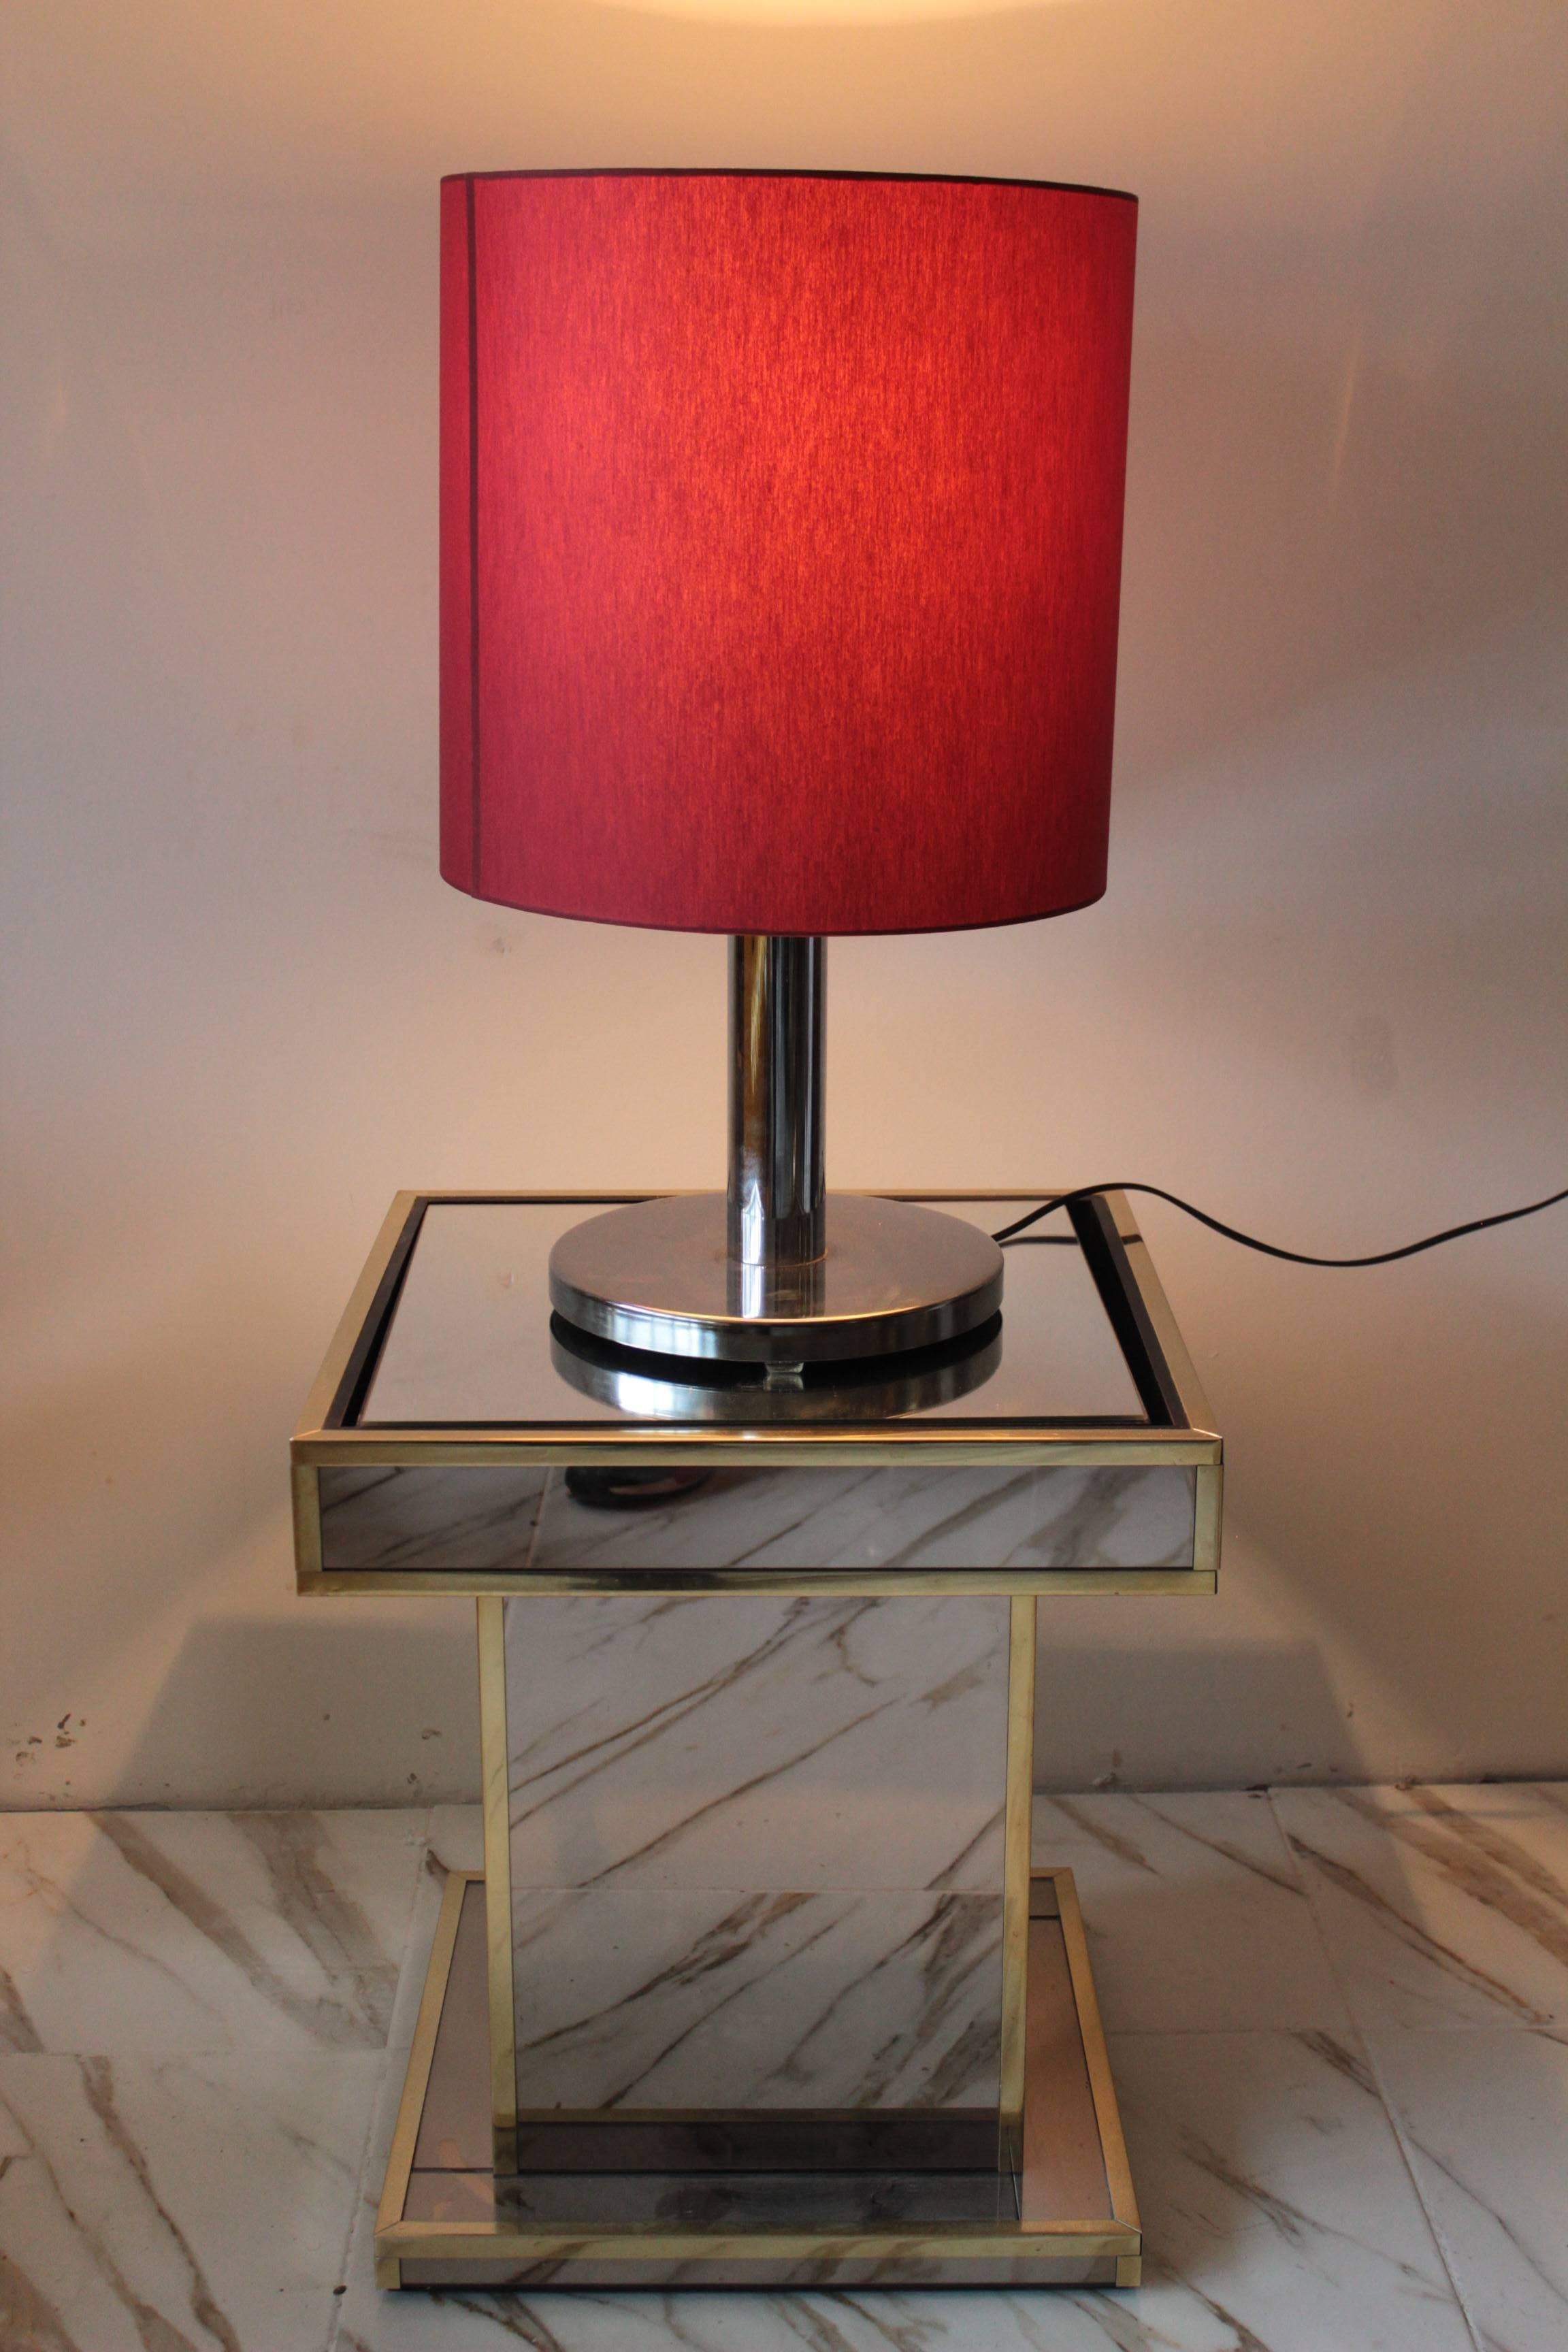 Large RAAK chrome table lamp, RAAK model no 250. This is a unique item on itself. It has a beautiful round shape holder and de model of the lamp and lampshade are all in the same model.
RAAK is a Dutch light design company which various designers